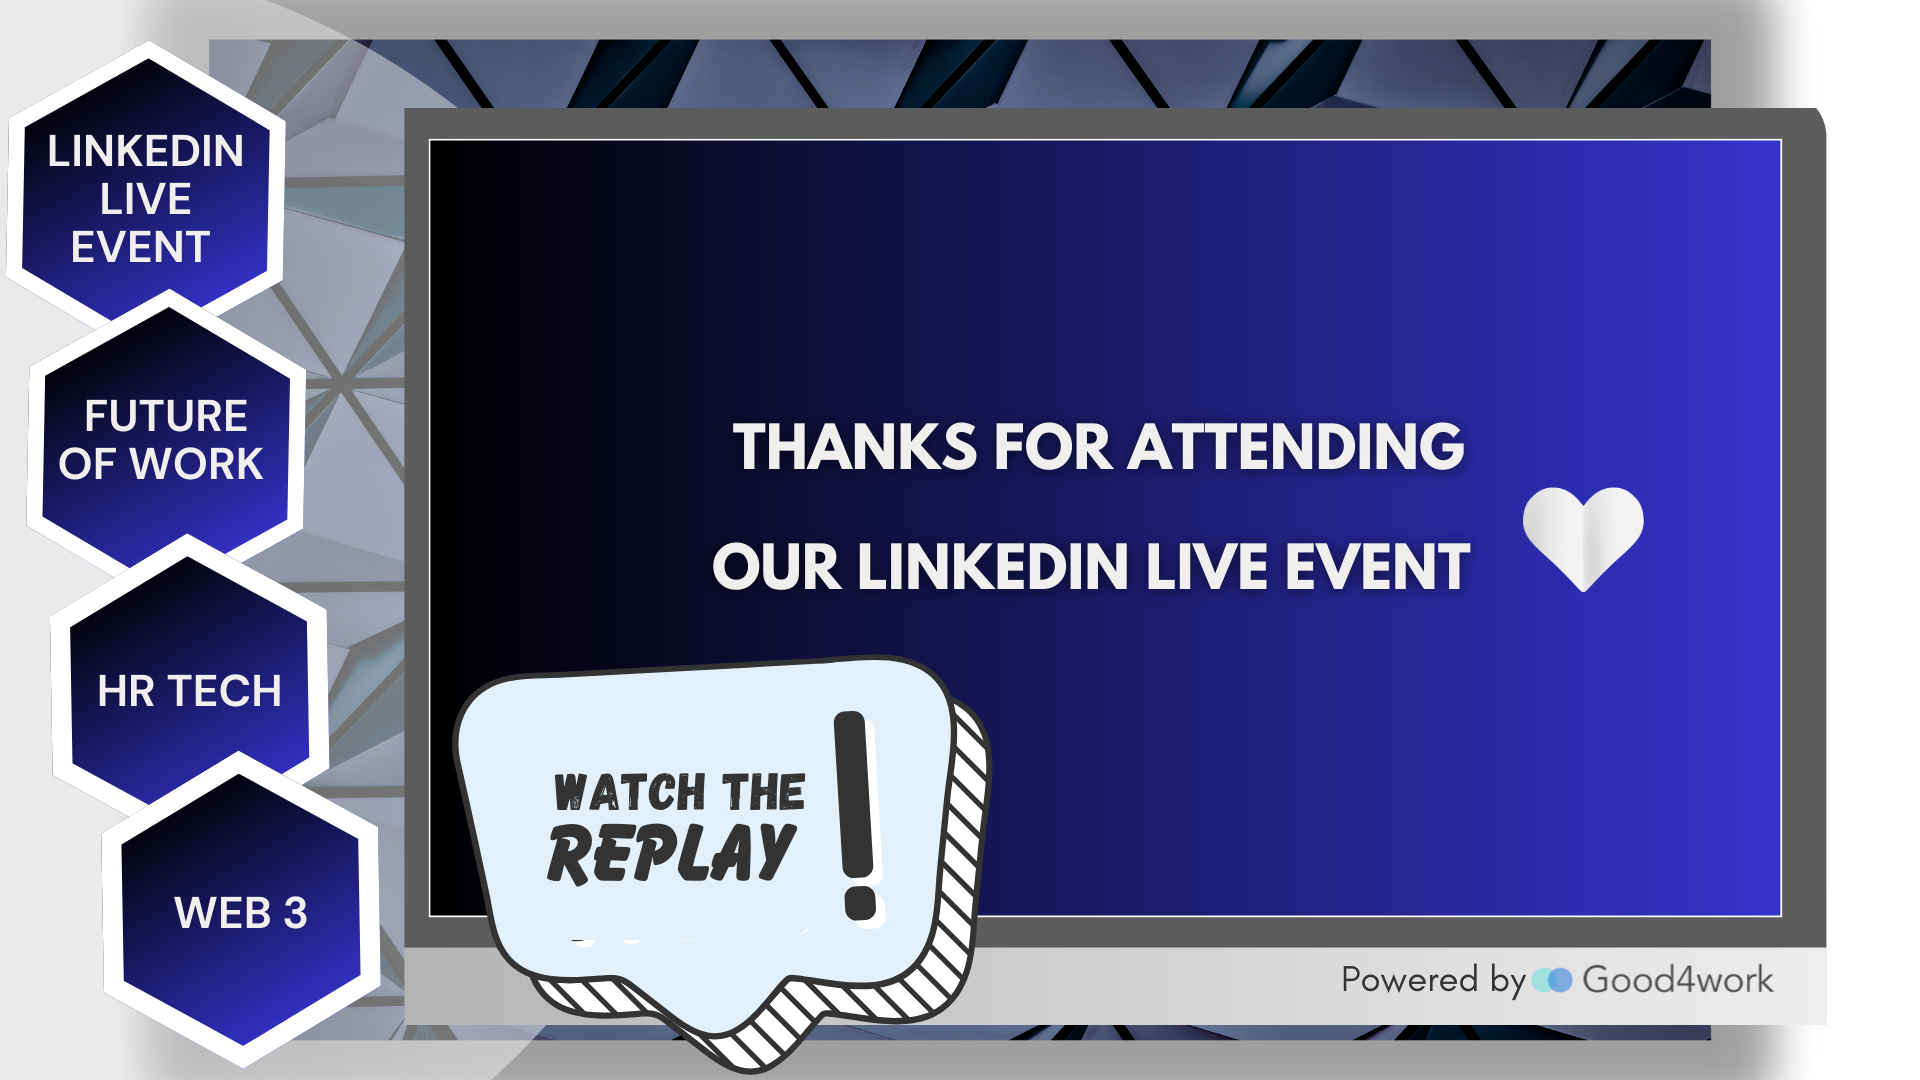 Thanks for joining our LI event - watch the replay